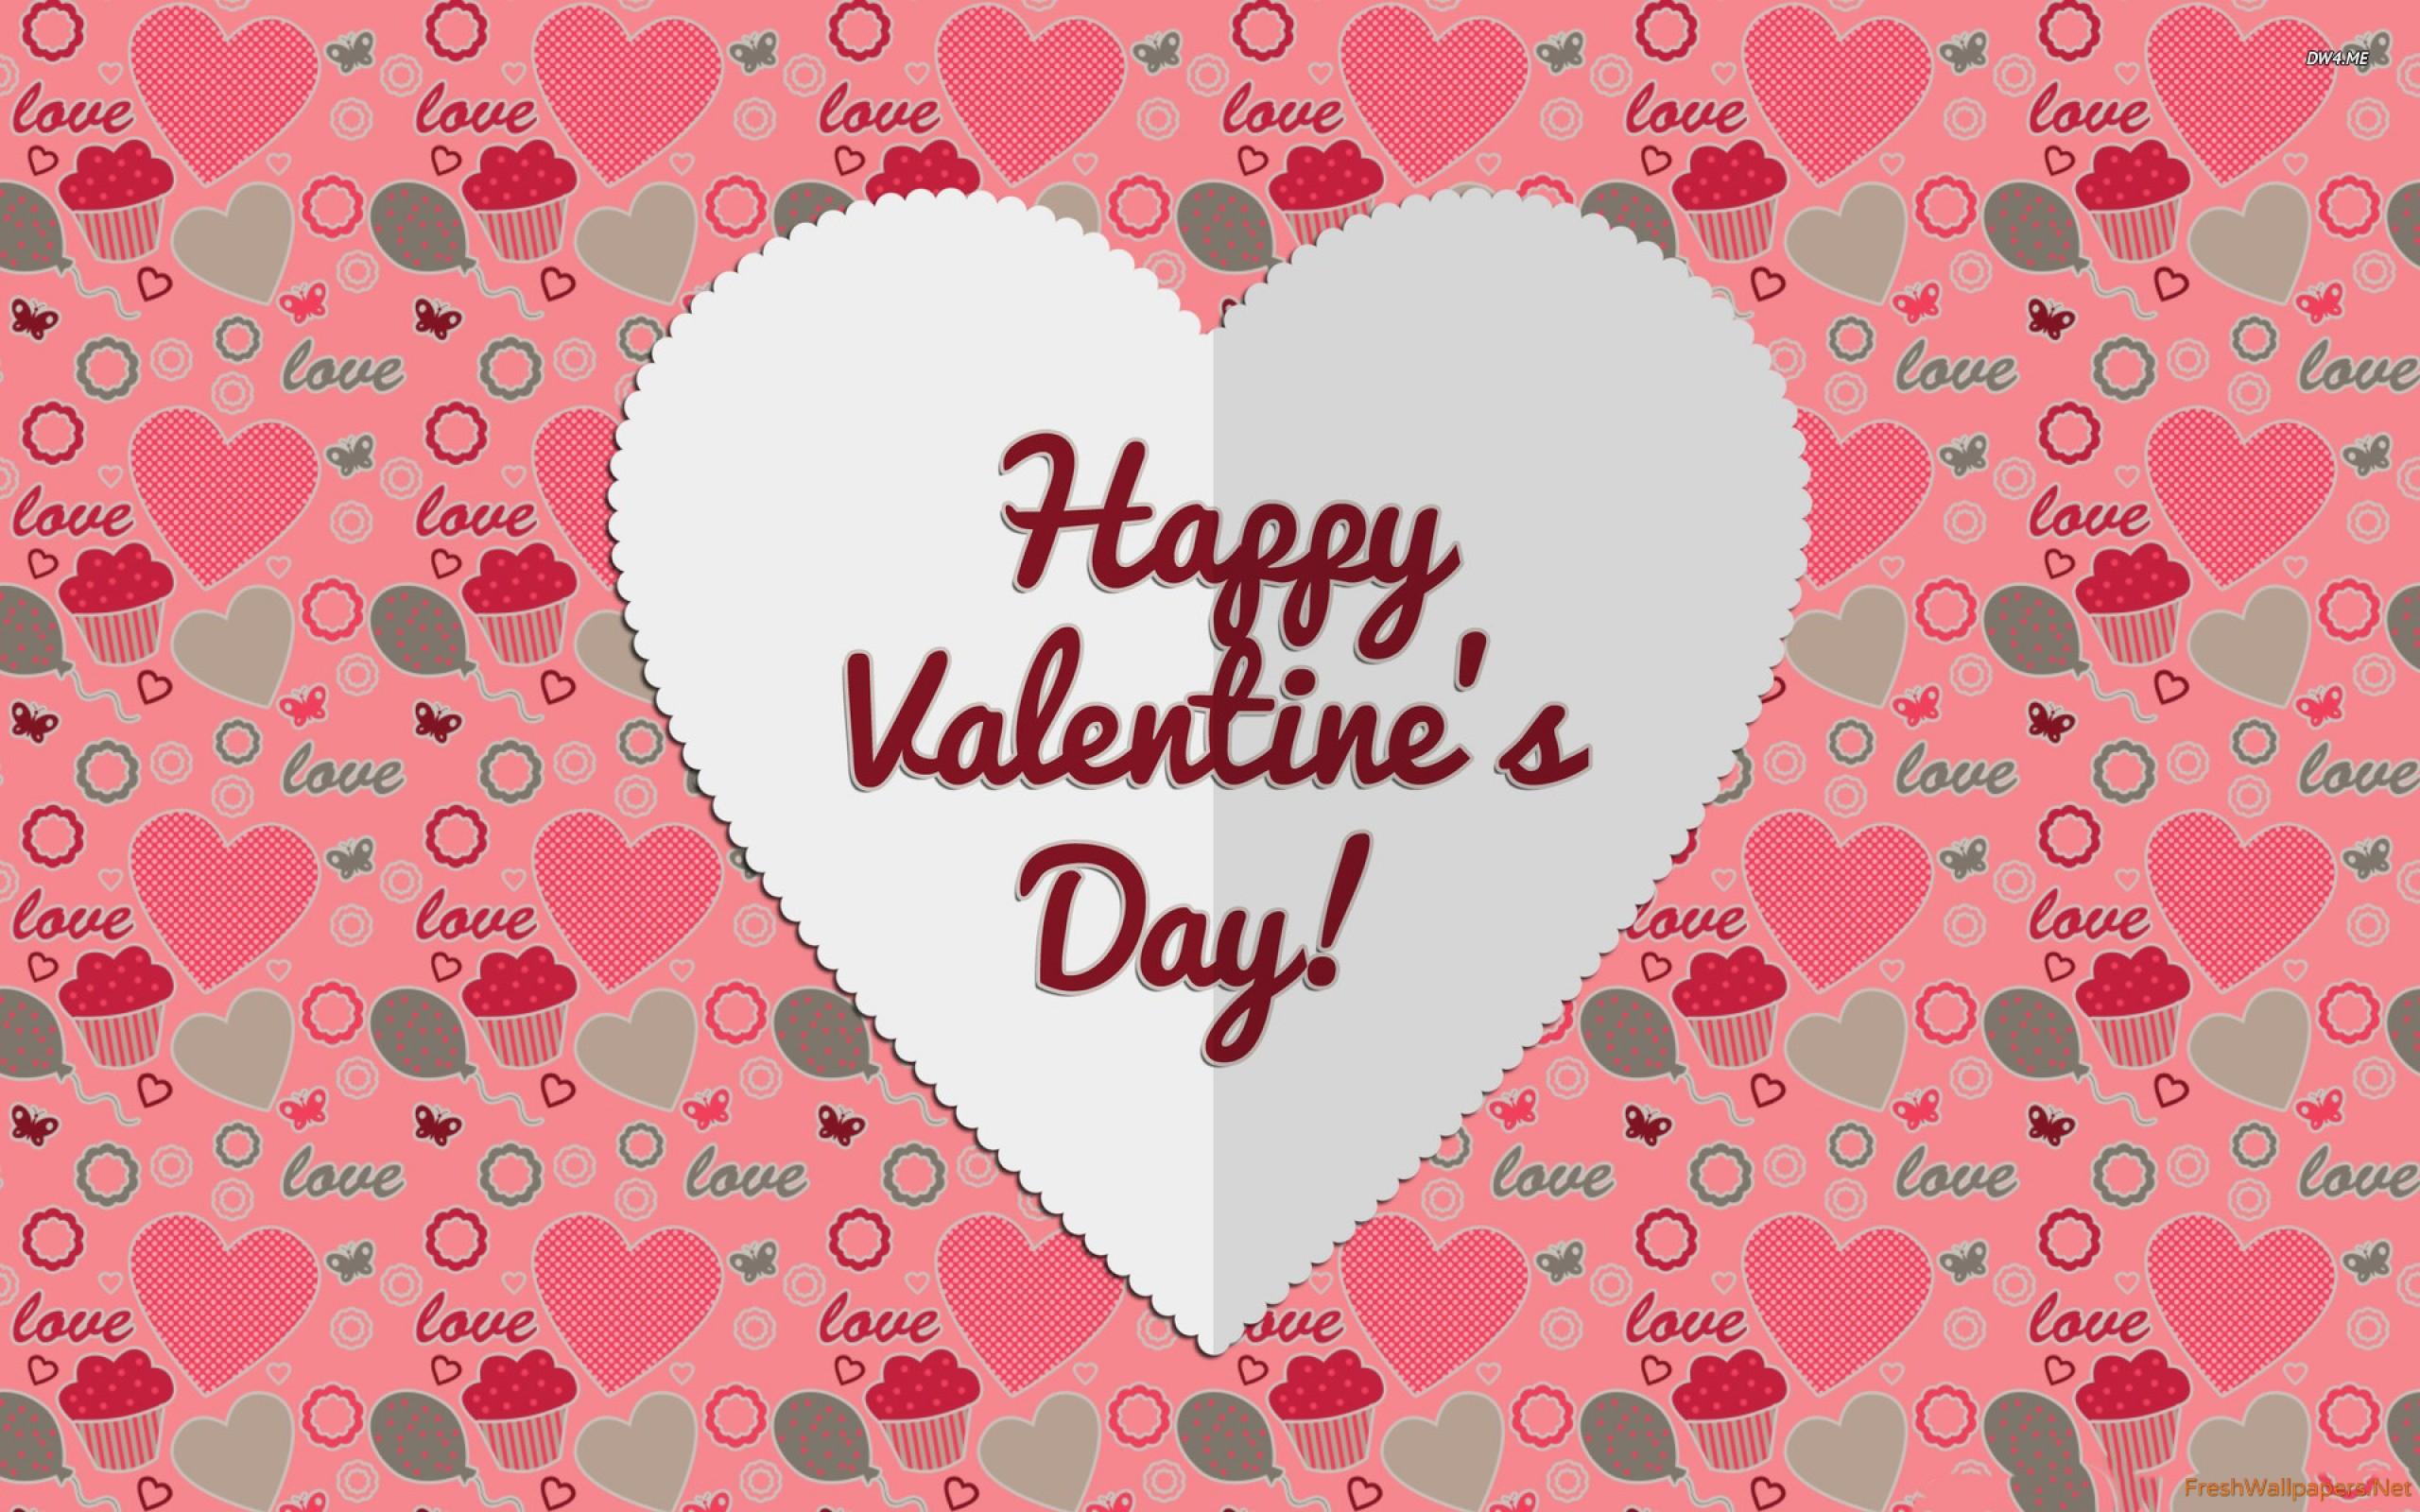 Happy Valentine's Day Greetings wallpaper